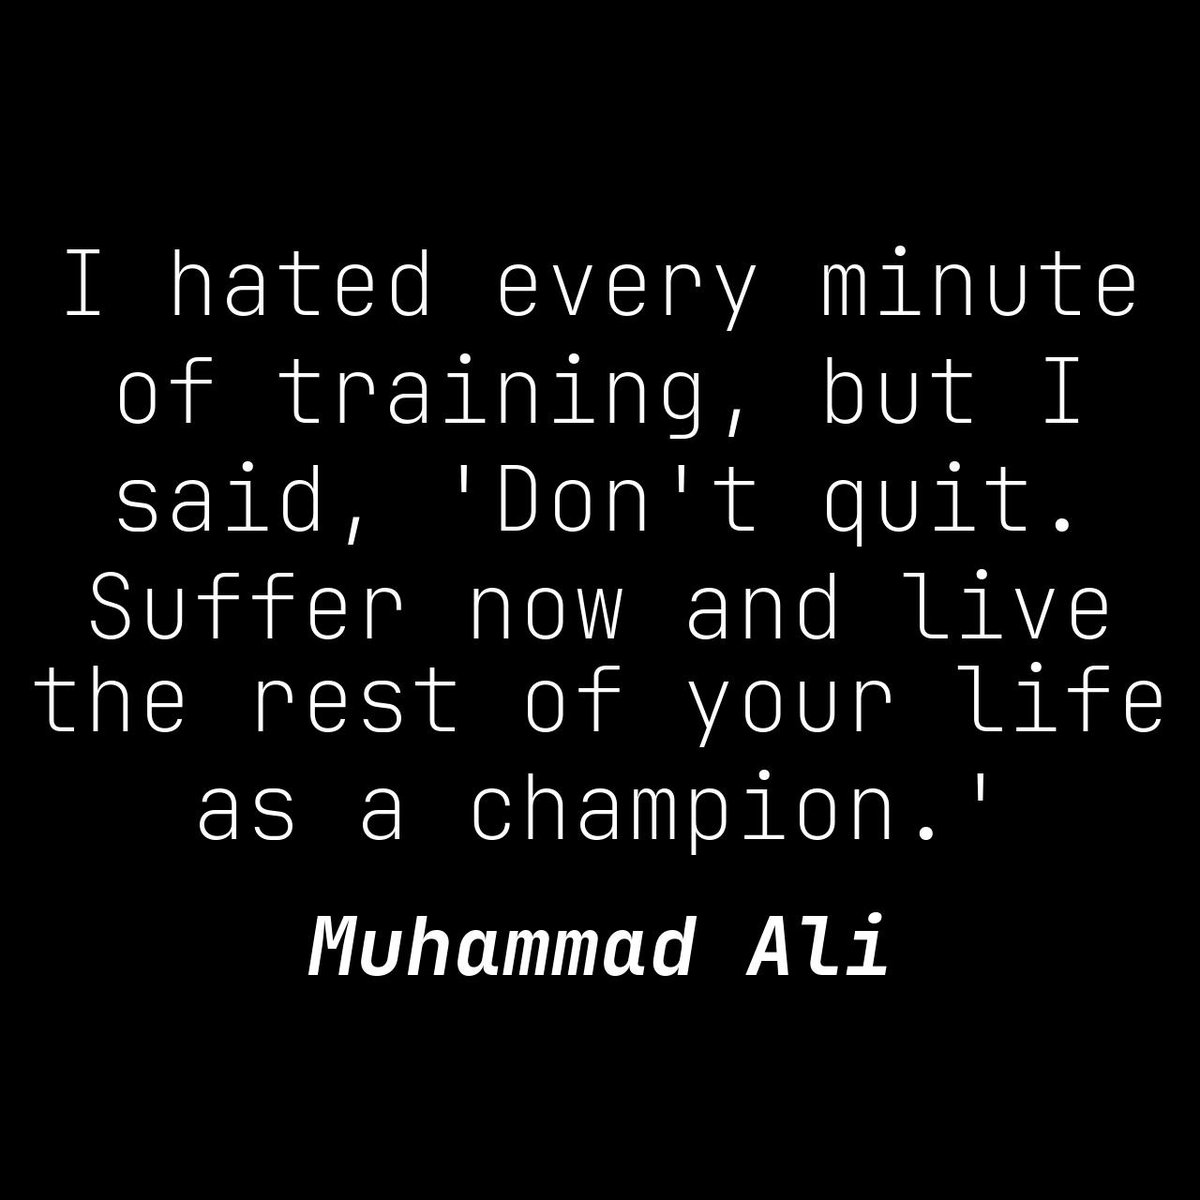 I may have despised every moment of my training, but I always reminded myself not to give up. Enduring the struggle now will lead to a life of triumph later. 💪🏆 #TrainingMotivation #DontQuit #SufferNow #ChampionLife